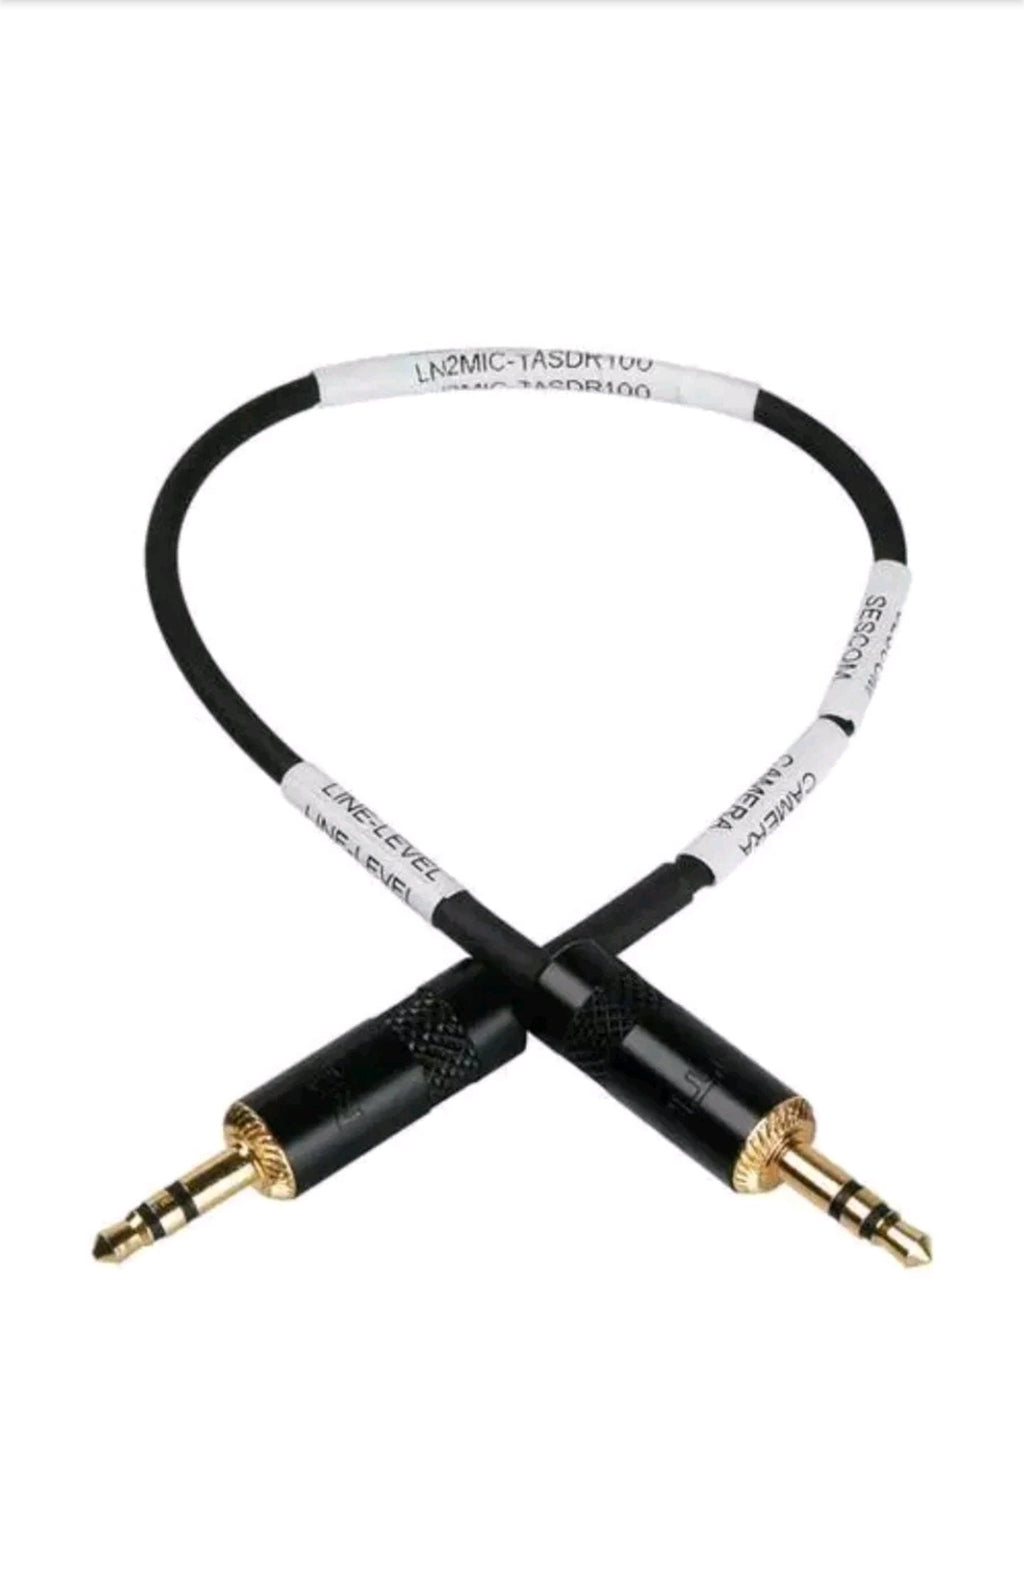 Sescom LN2MIC-TASDR100 3.5 Line to Mic 35dB Attenuation 9" DSLR Cable for DR-100